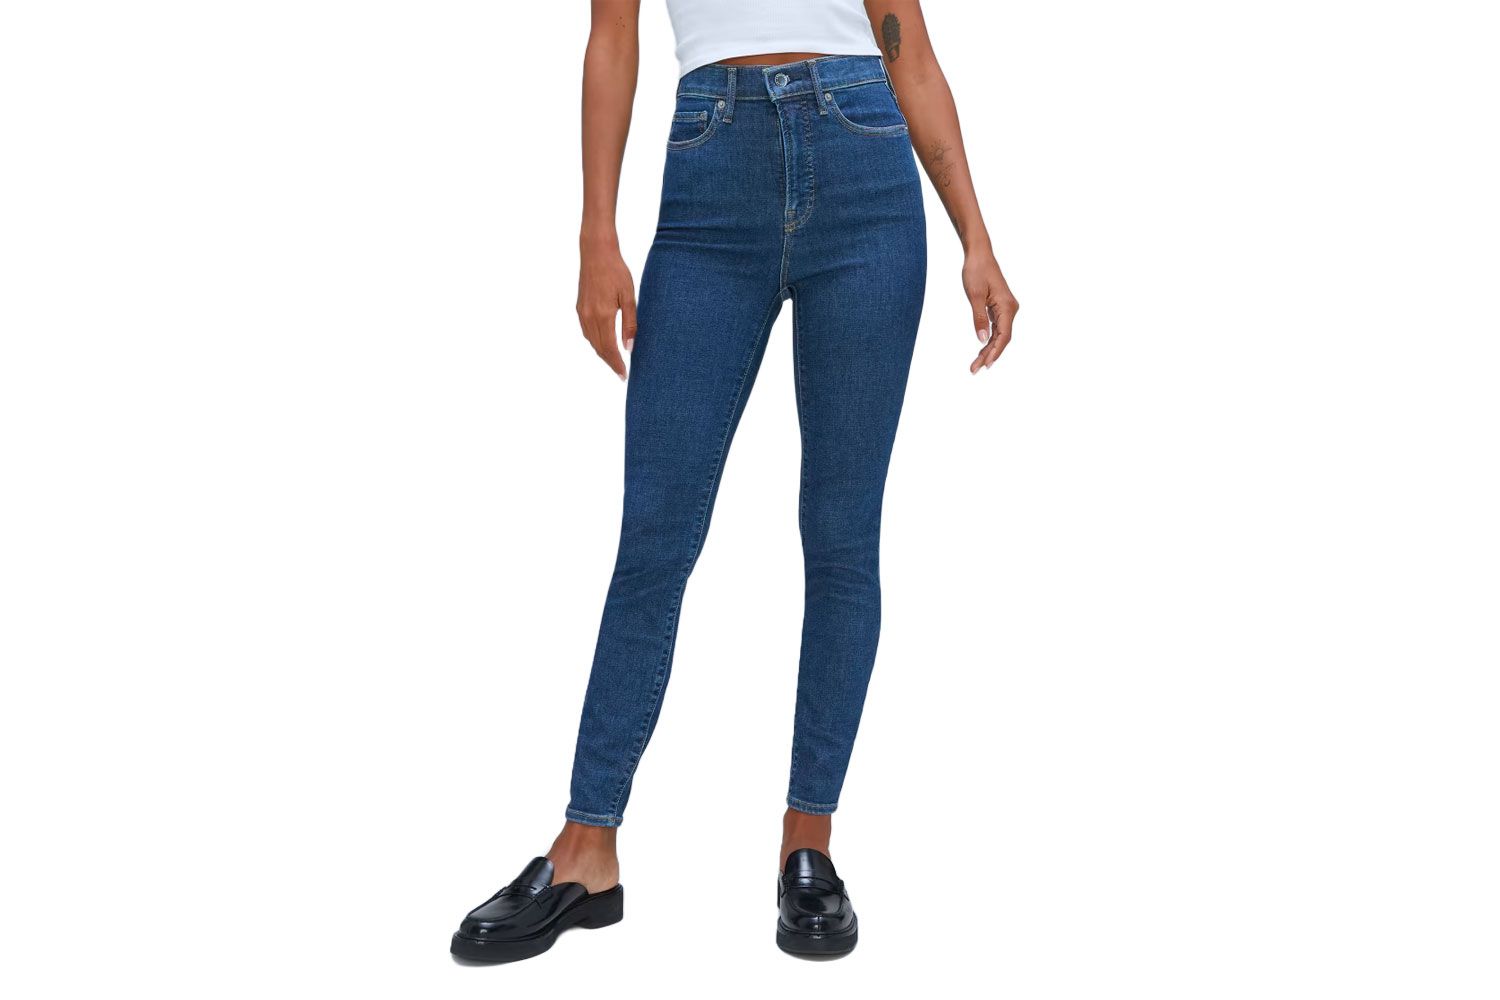 Best skinny jeans have been a dominant force in fashion for years, celebrated for their versatility and ability to flatter a wide array of body types.